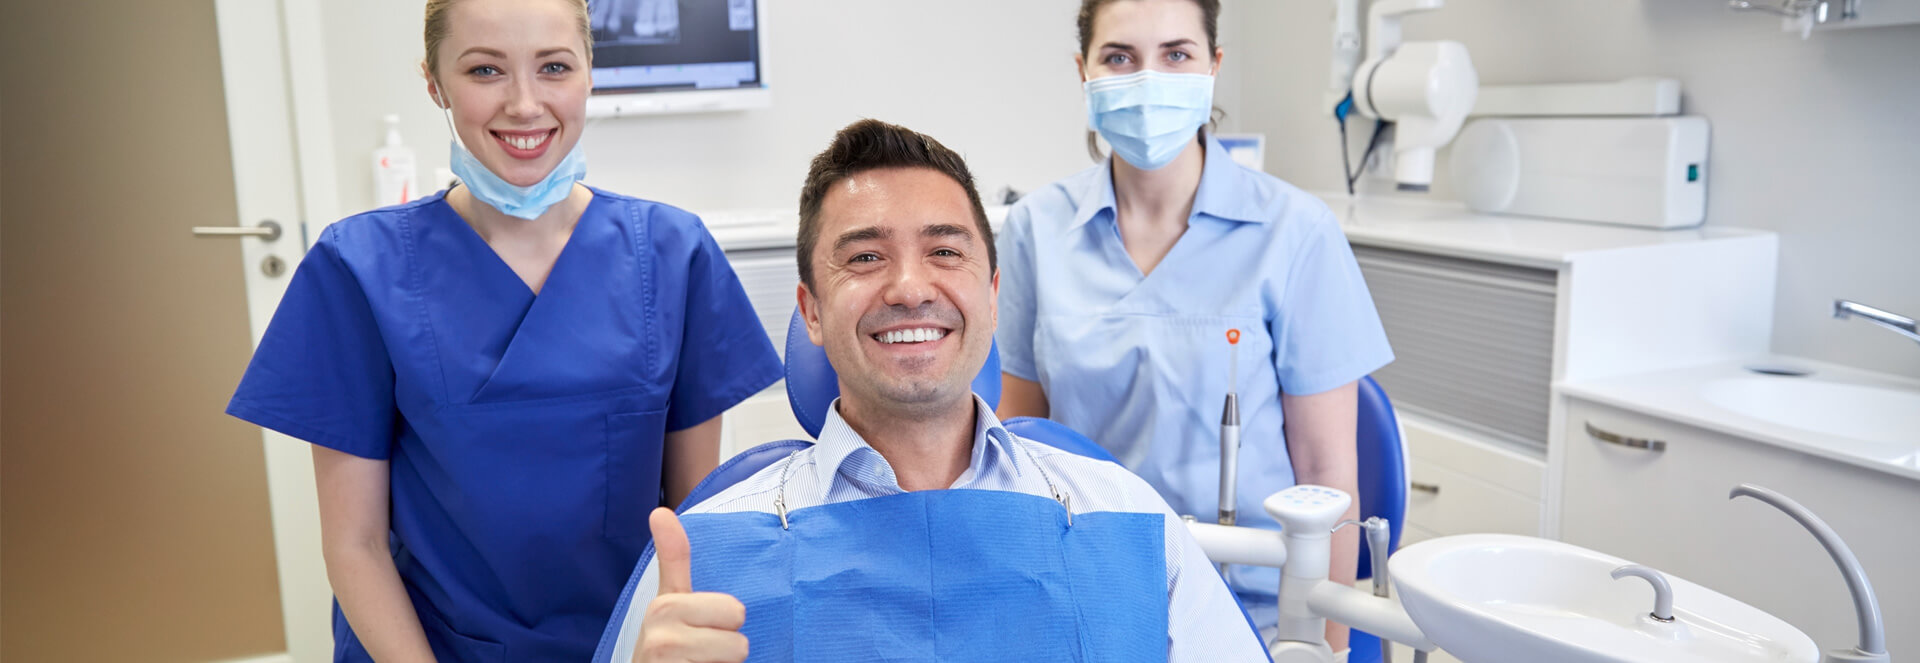 Male patient smiling showing thumbs up with dental staff behind